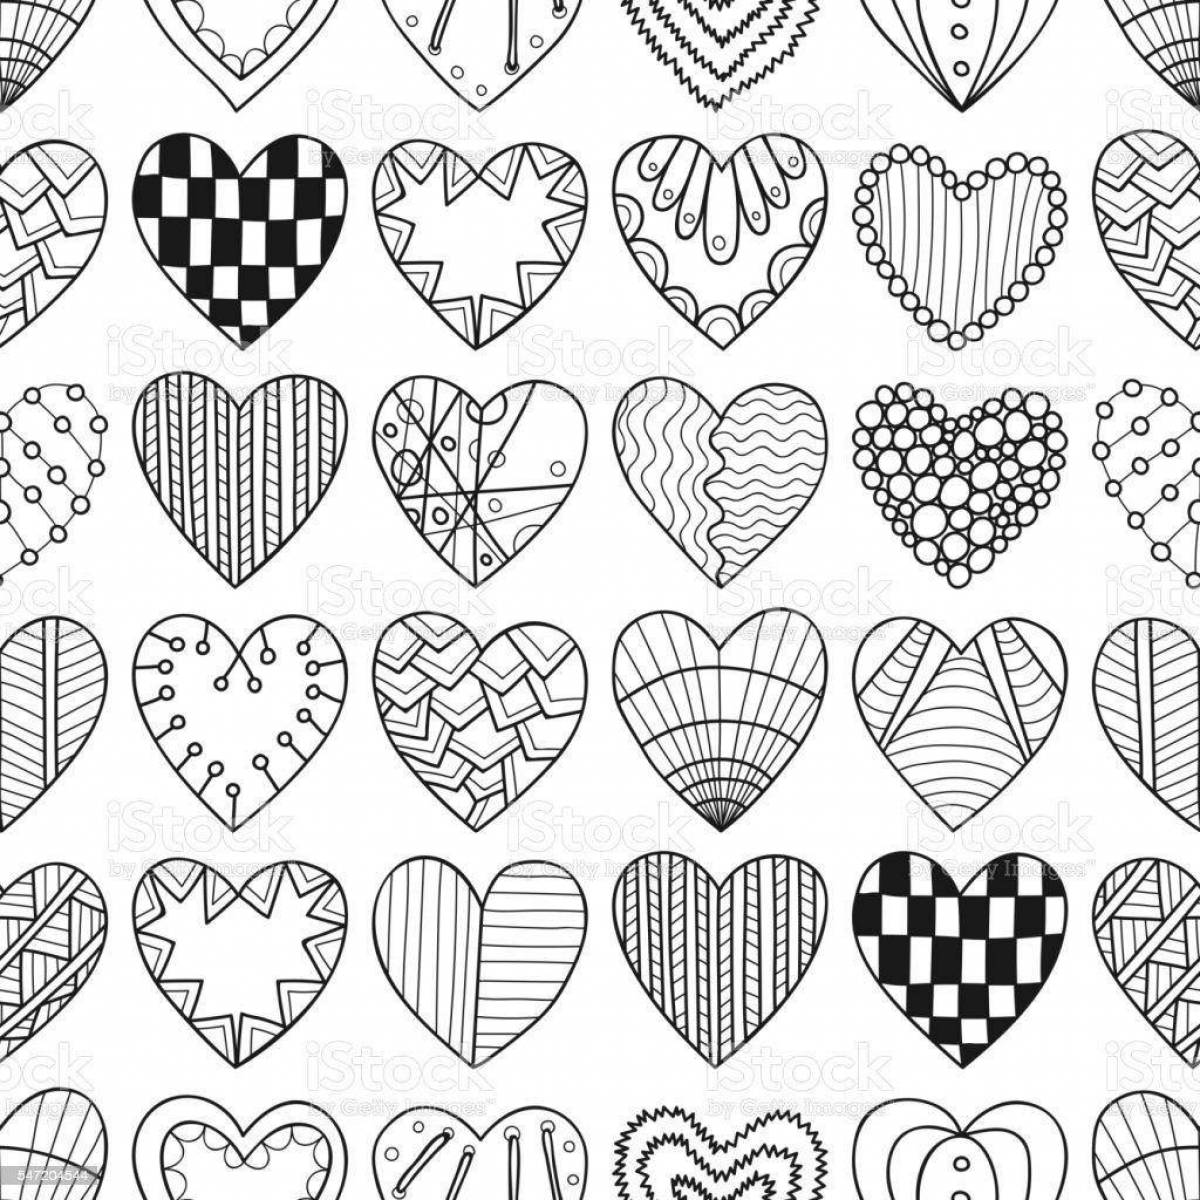 Lovely heart lot coloring page